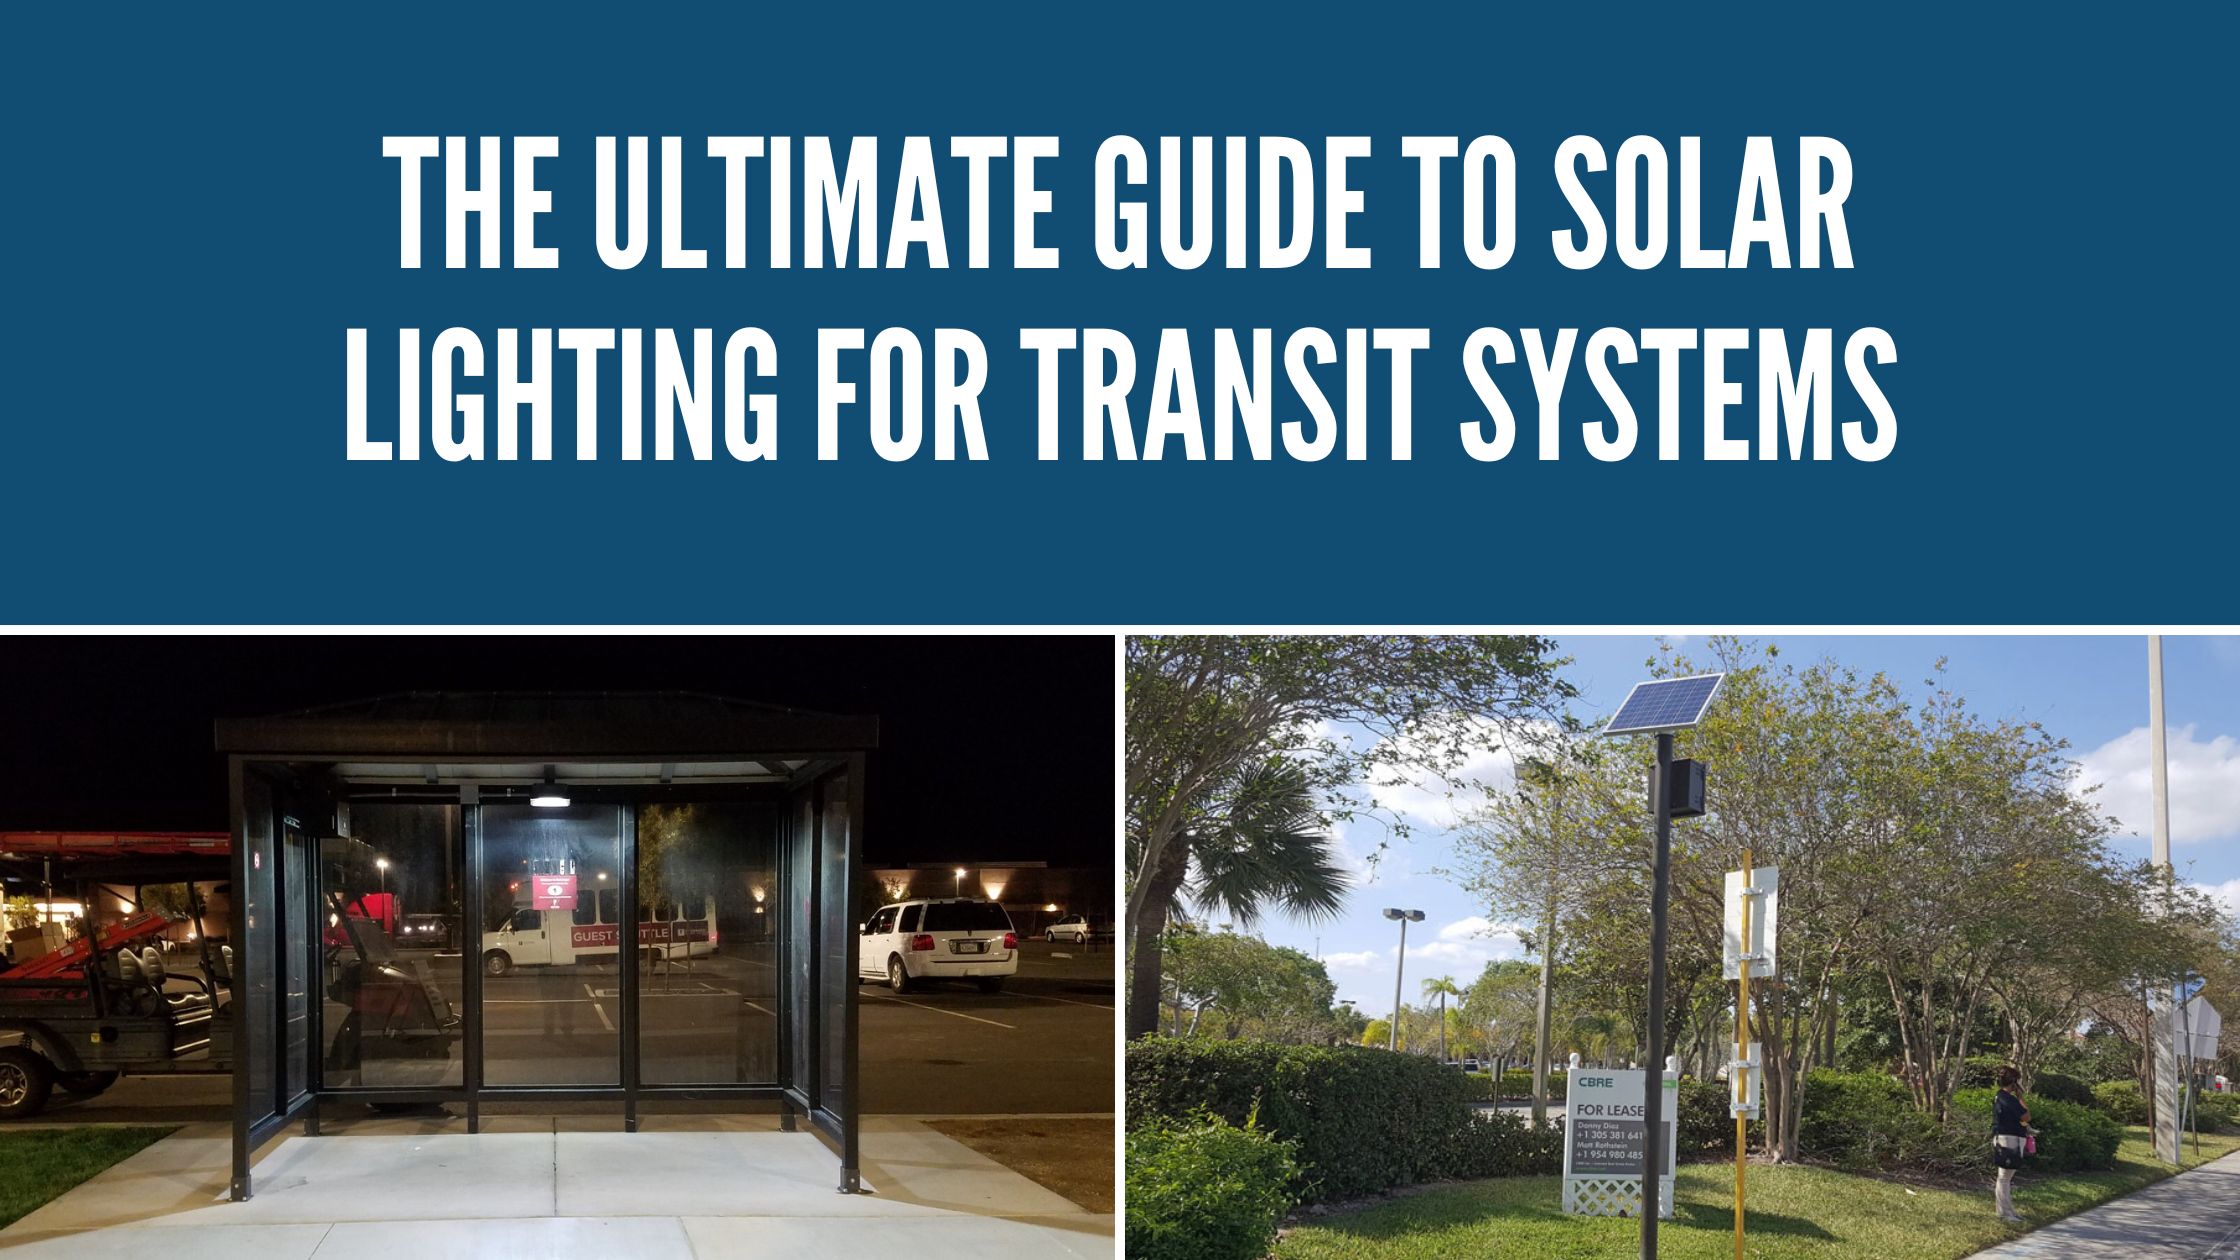 The Ultimate Guide to Solar Lighting for Transit Systems